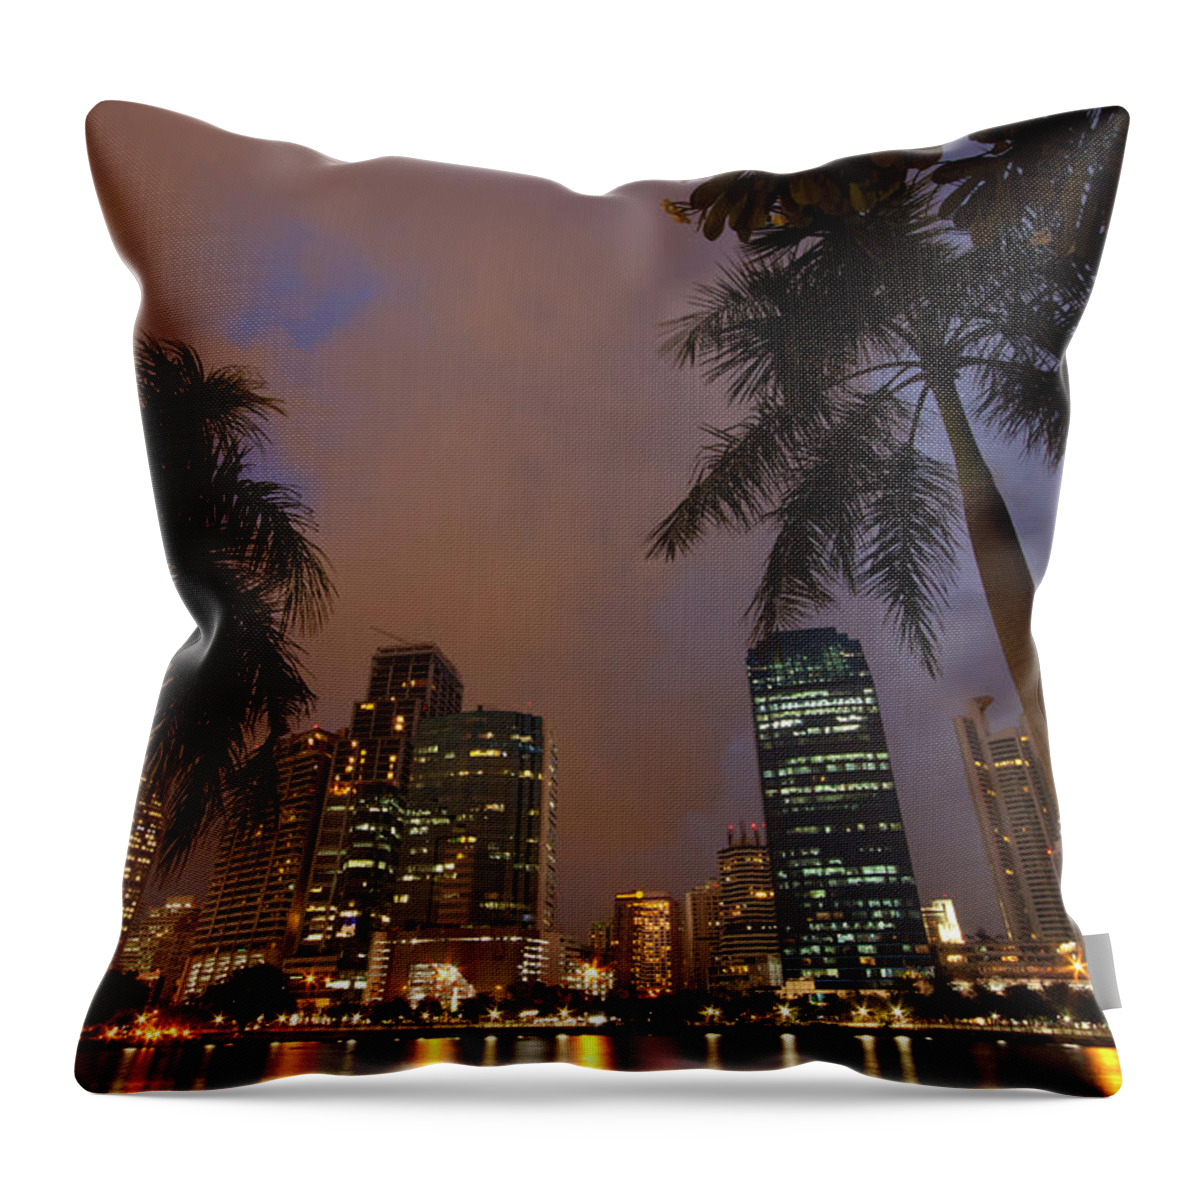 Tranquility Throw Pillow featuring the photograph Bangkok, Thailand And Palm Trees by Lightvision, Llc